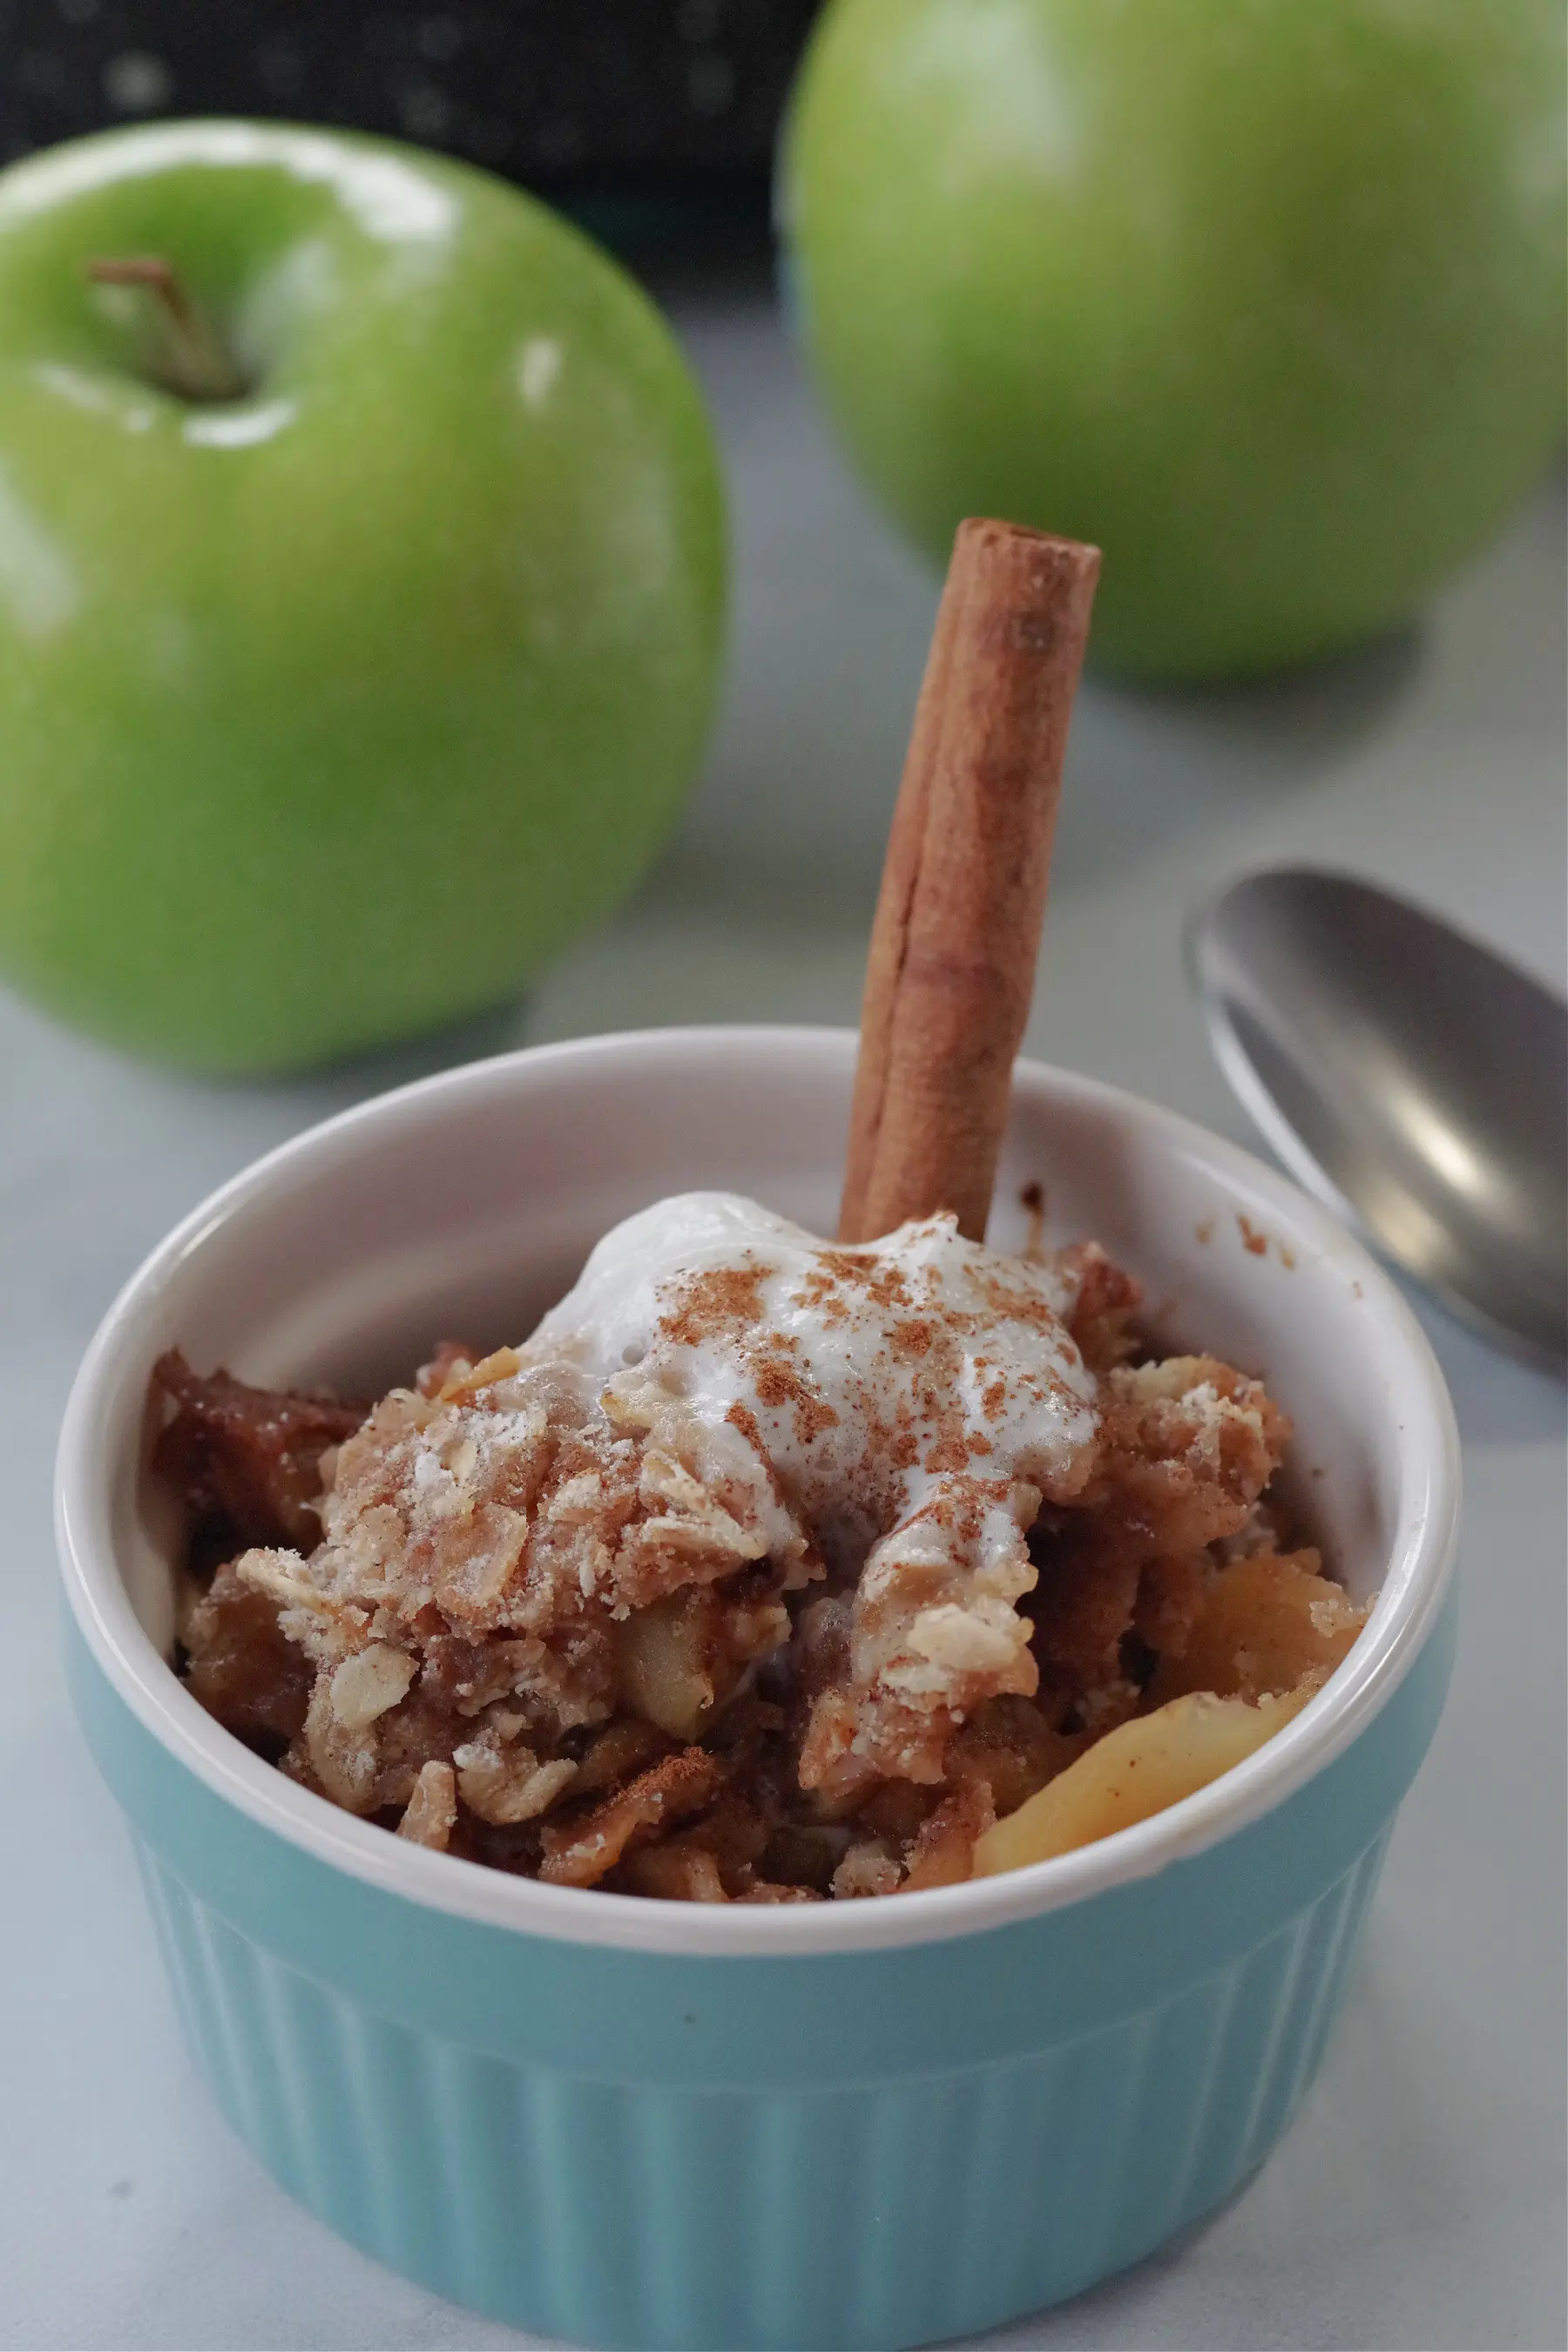 weight watchers apple crisp in a small blue bowl with a cinnamon stick in it and 2 green apples and a spoon in the background